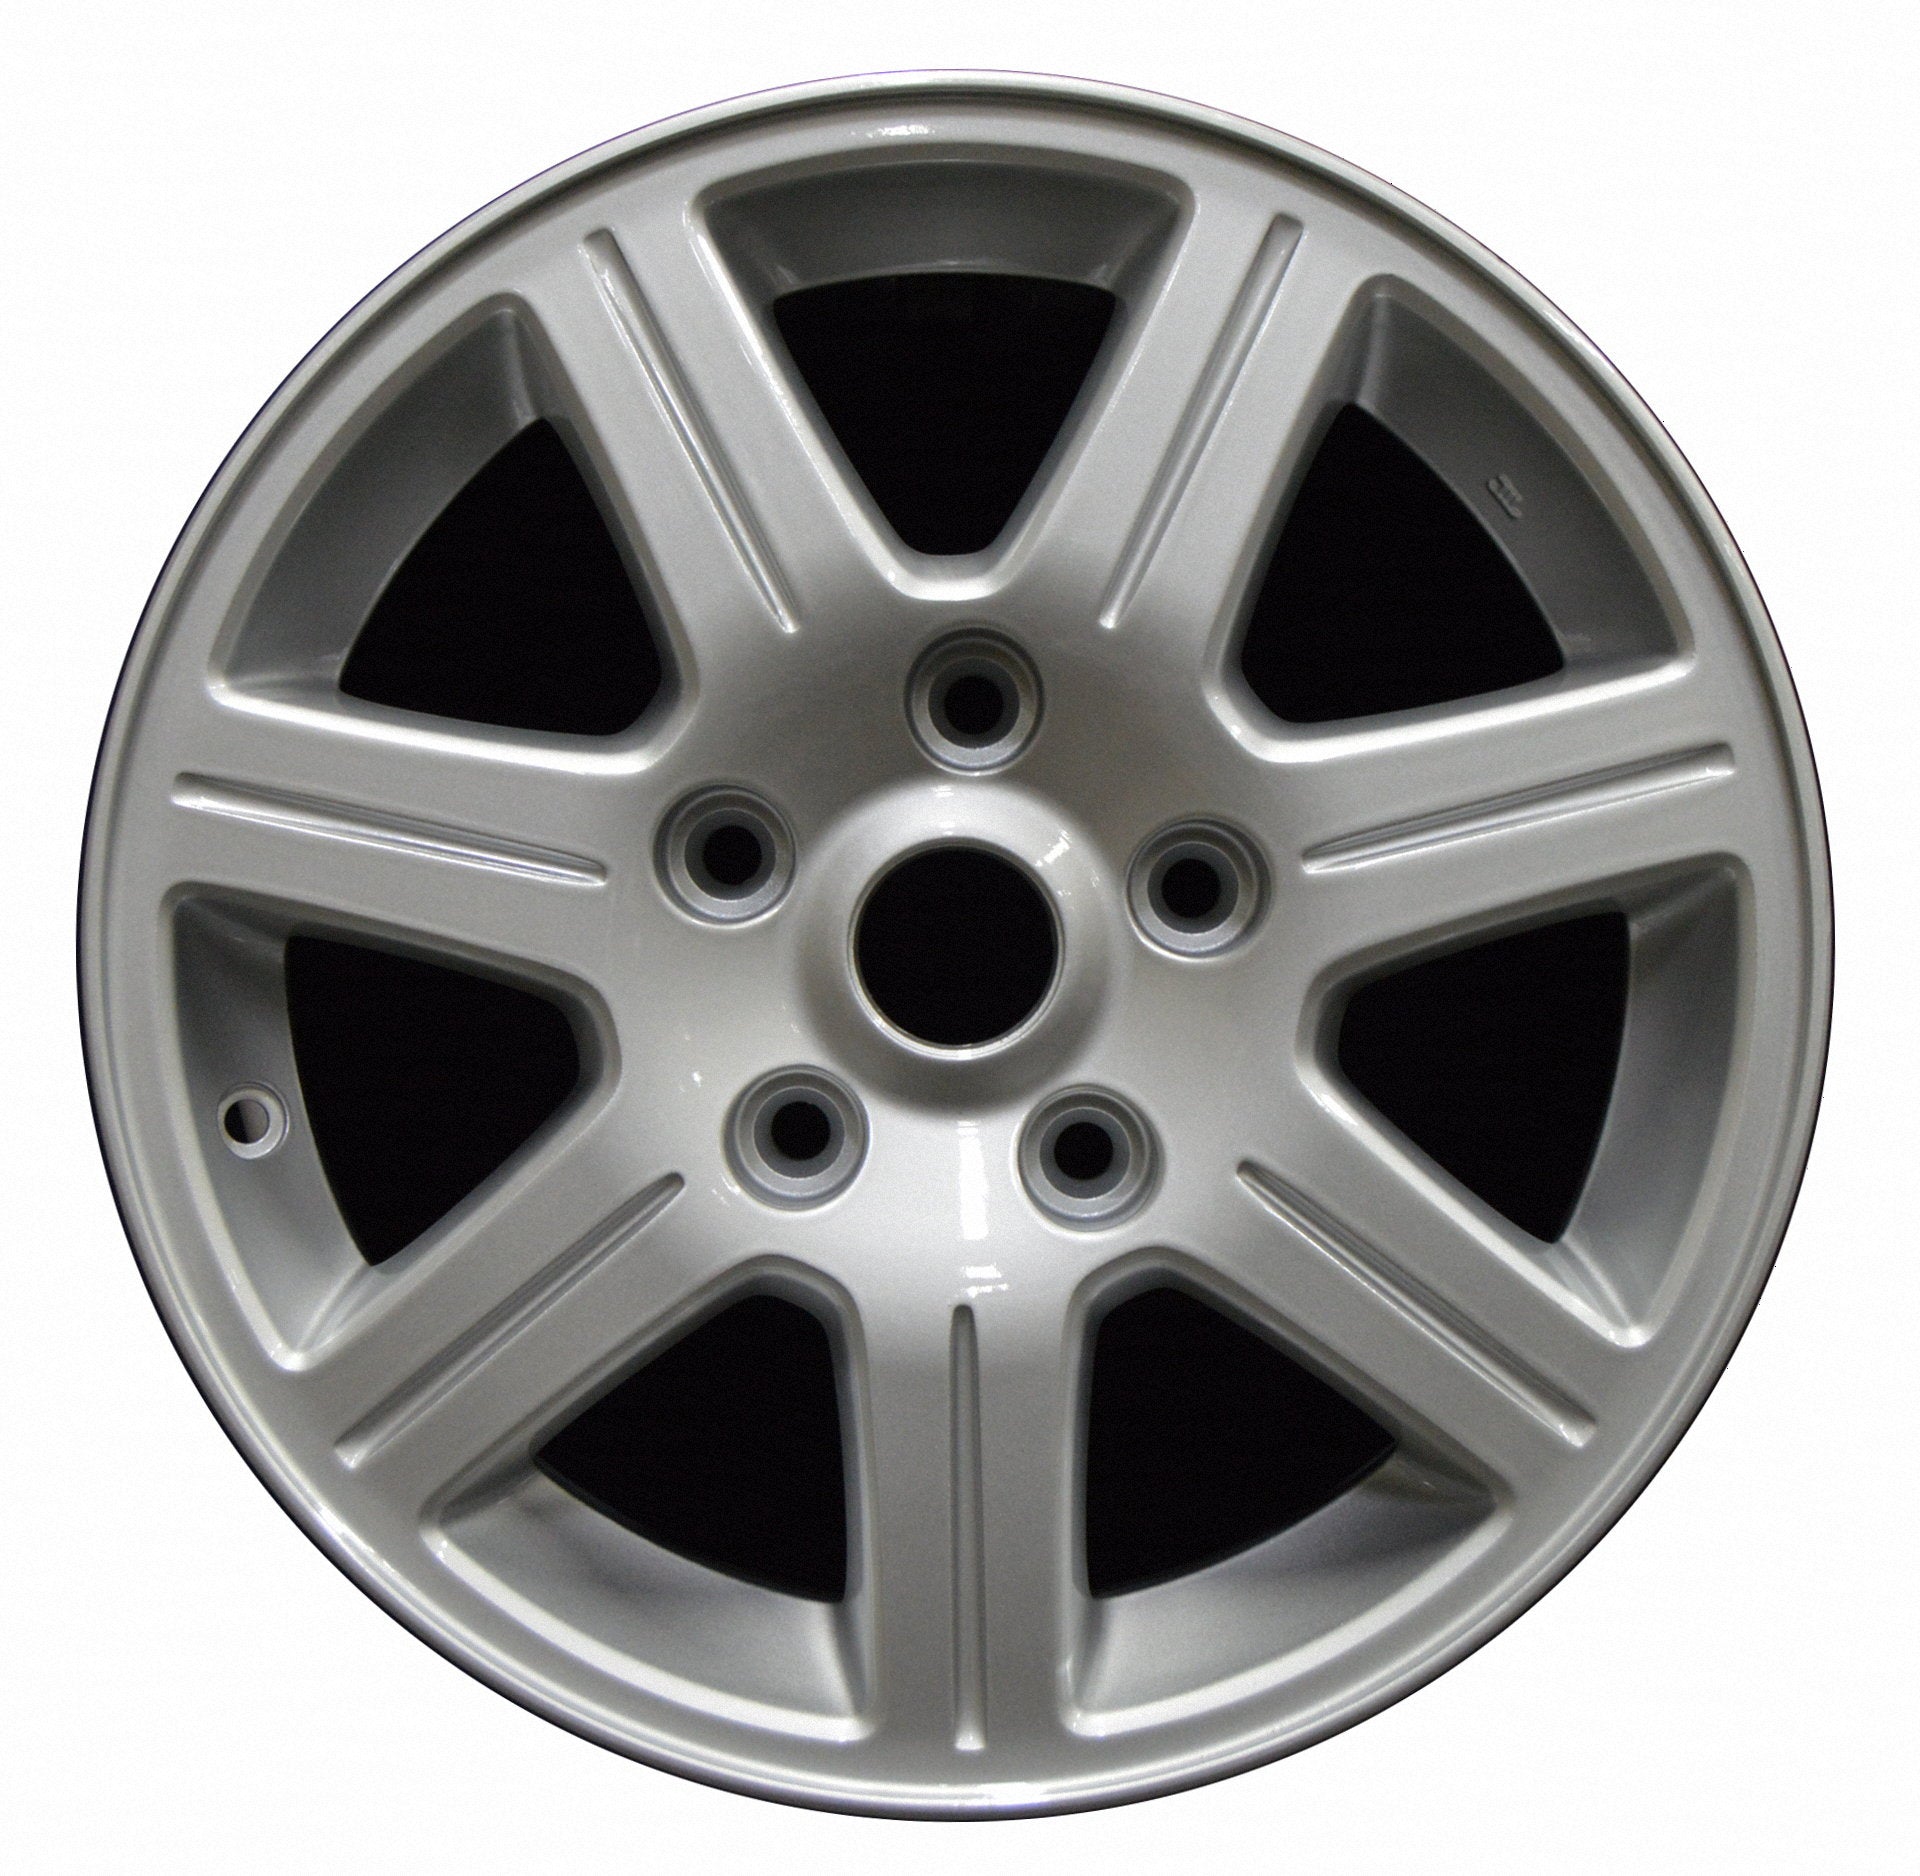 Chrysler Town & Country  2008, 2009, 2010 Factory OEM Car Wheel Size 16x6.5 Alloy WAO.2330.LS01.FF